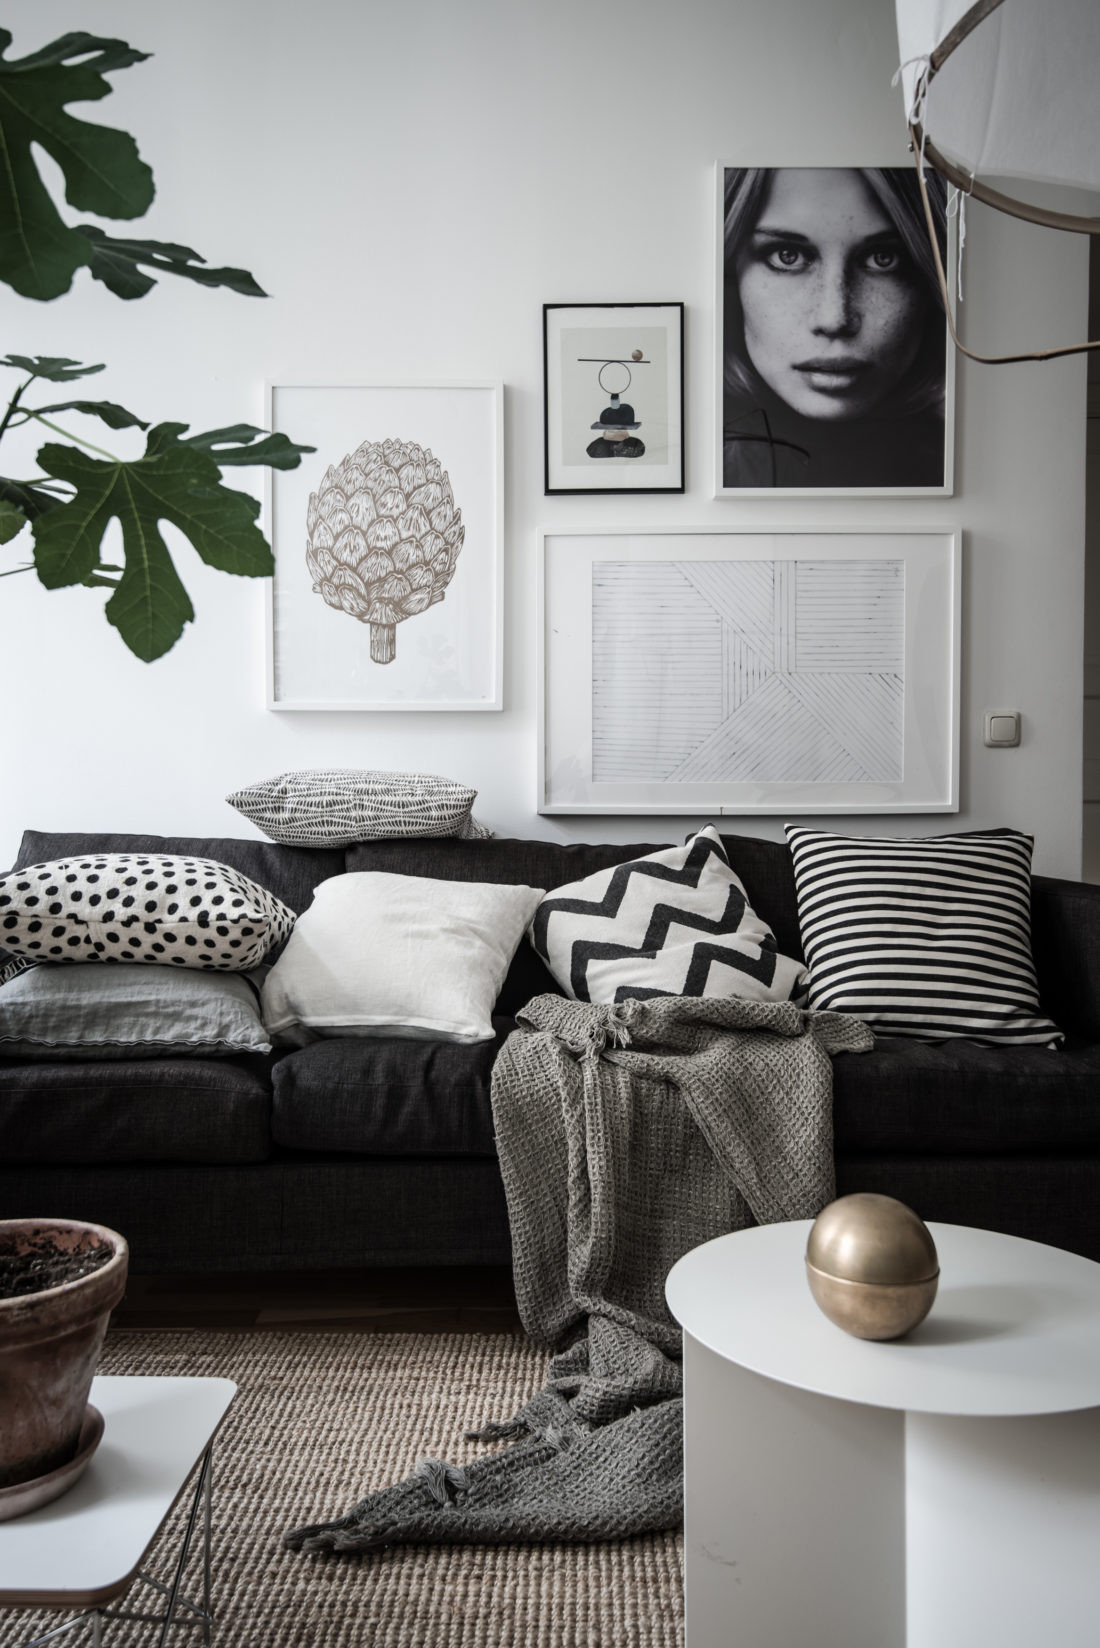 DIY Decor Living Room
 8 clever small living room ideas with Scandi style DIY